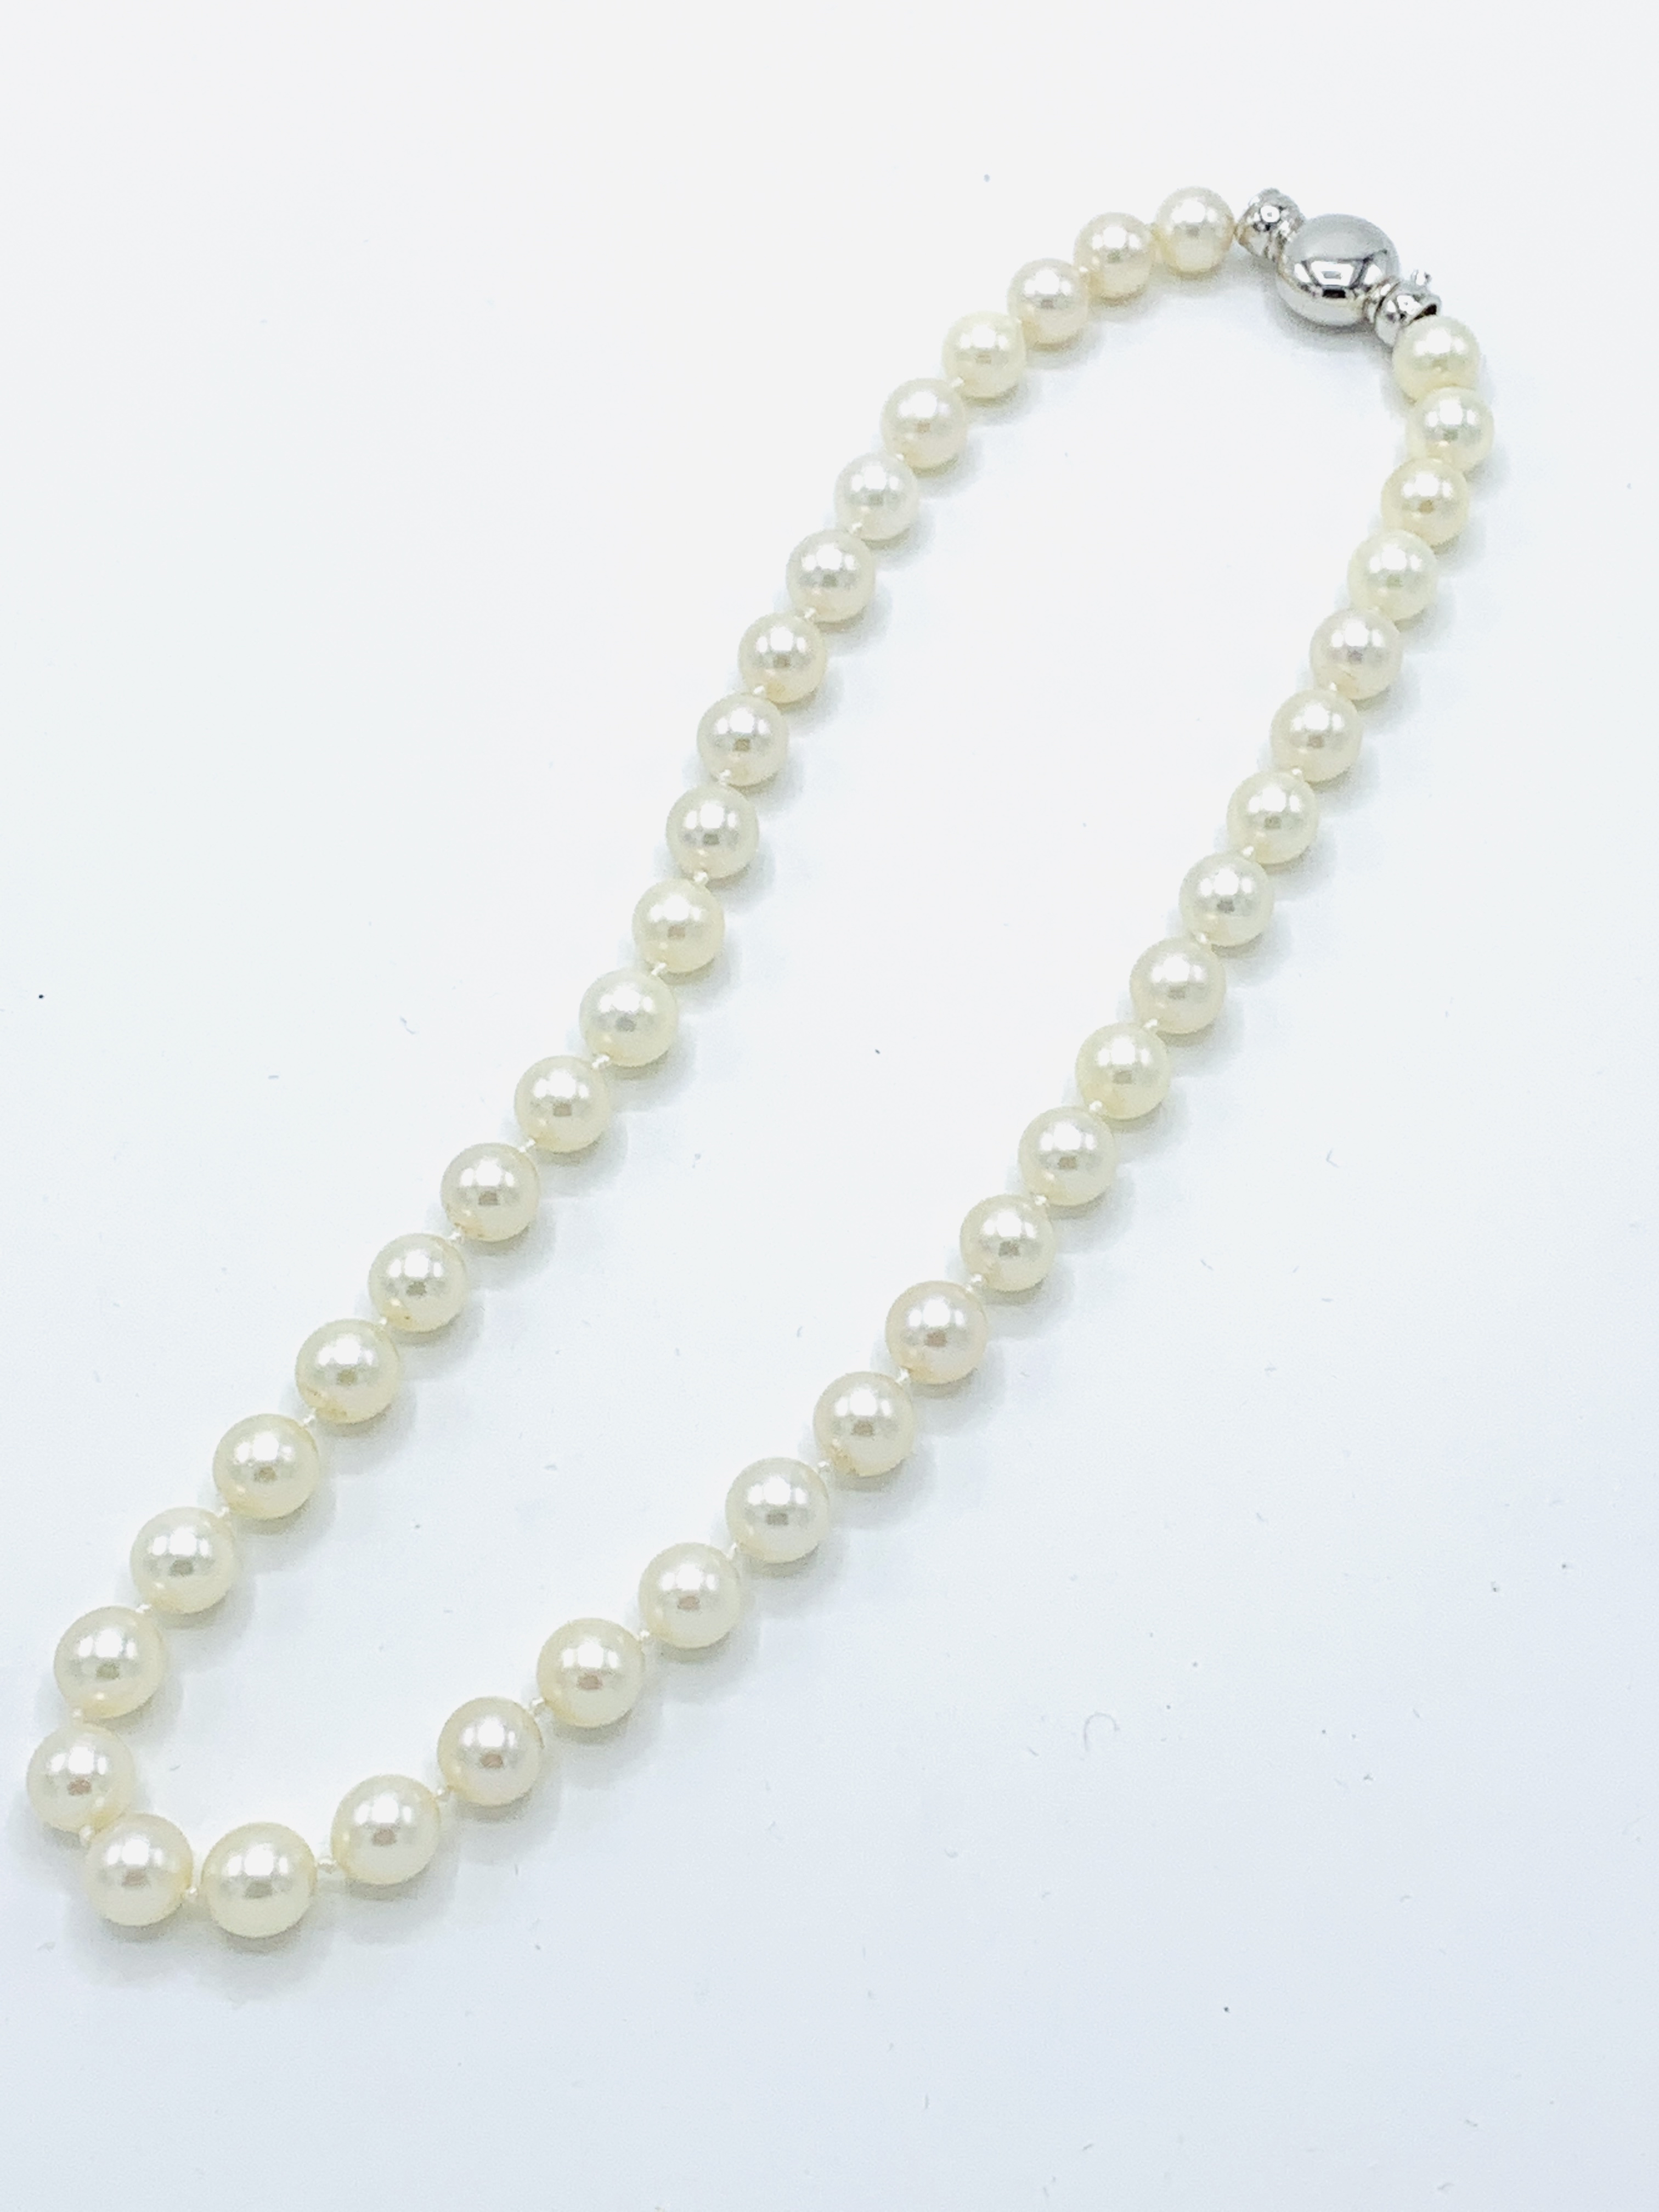 Cultured pearl necklace. - Image 4 of 4